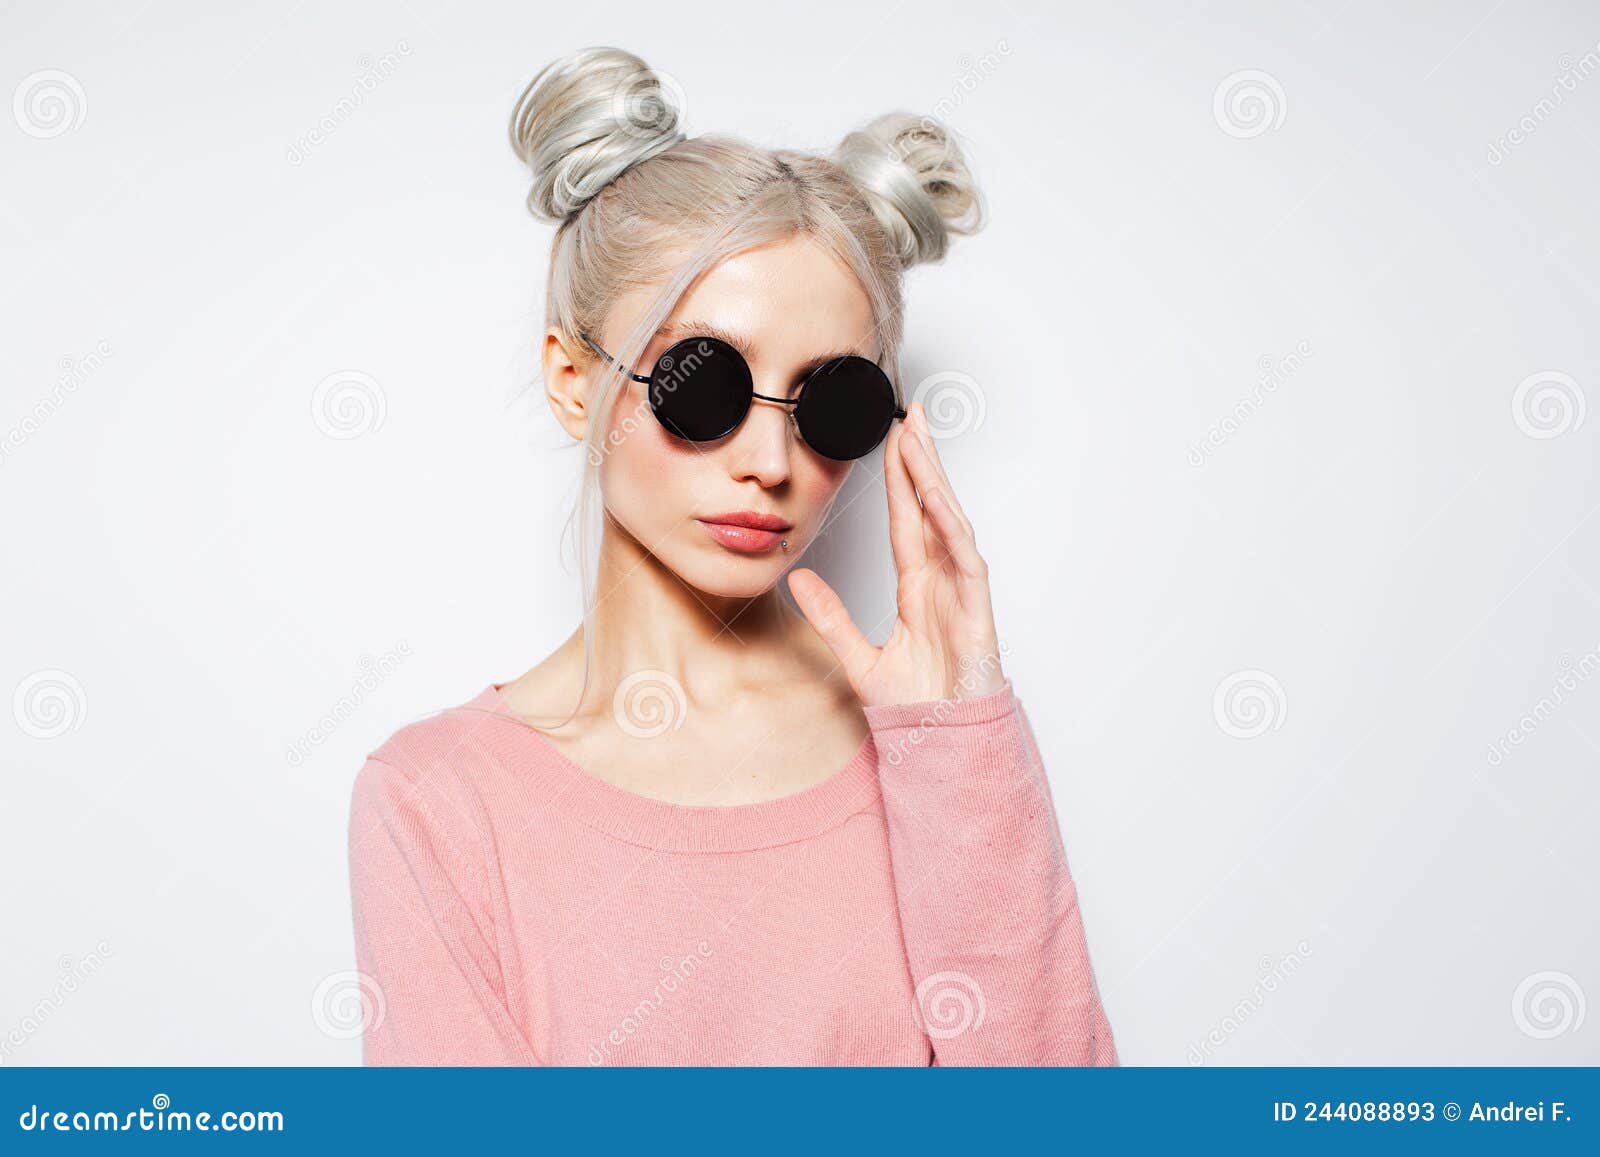 4. Trendy blonde hair and brown sunglasses - wide 2